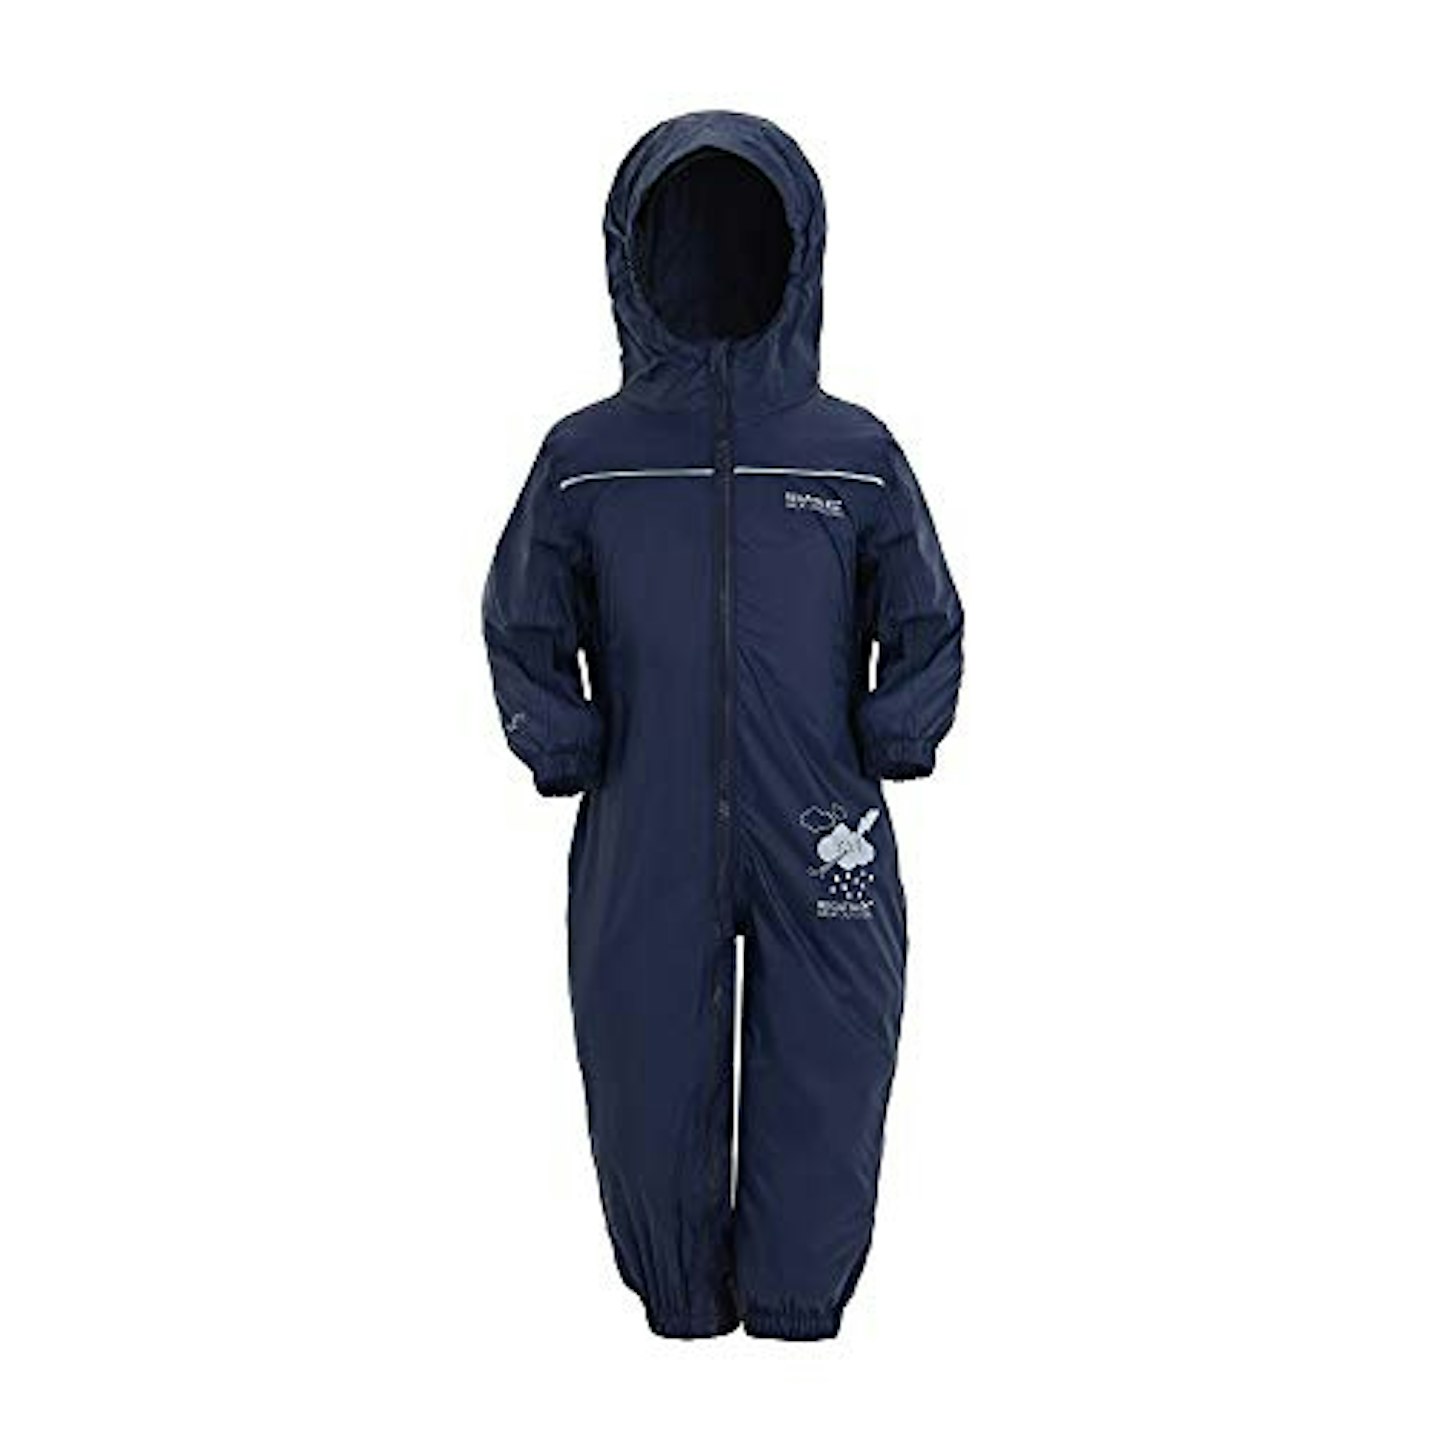 Navy blue Regatta unisex kids puddle Iv all-in-one suit with hood